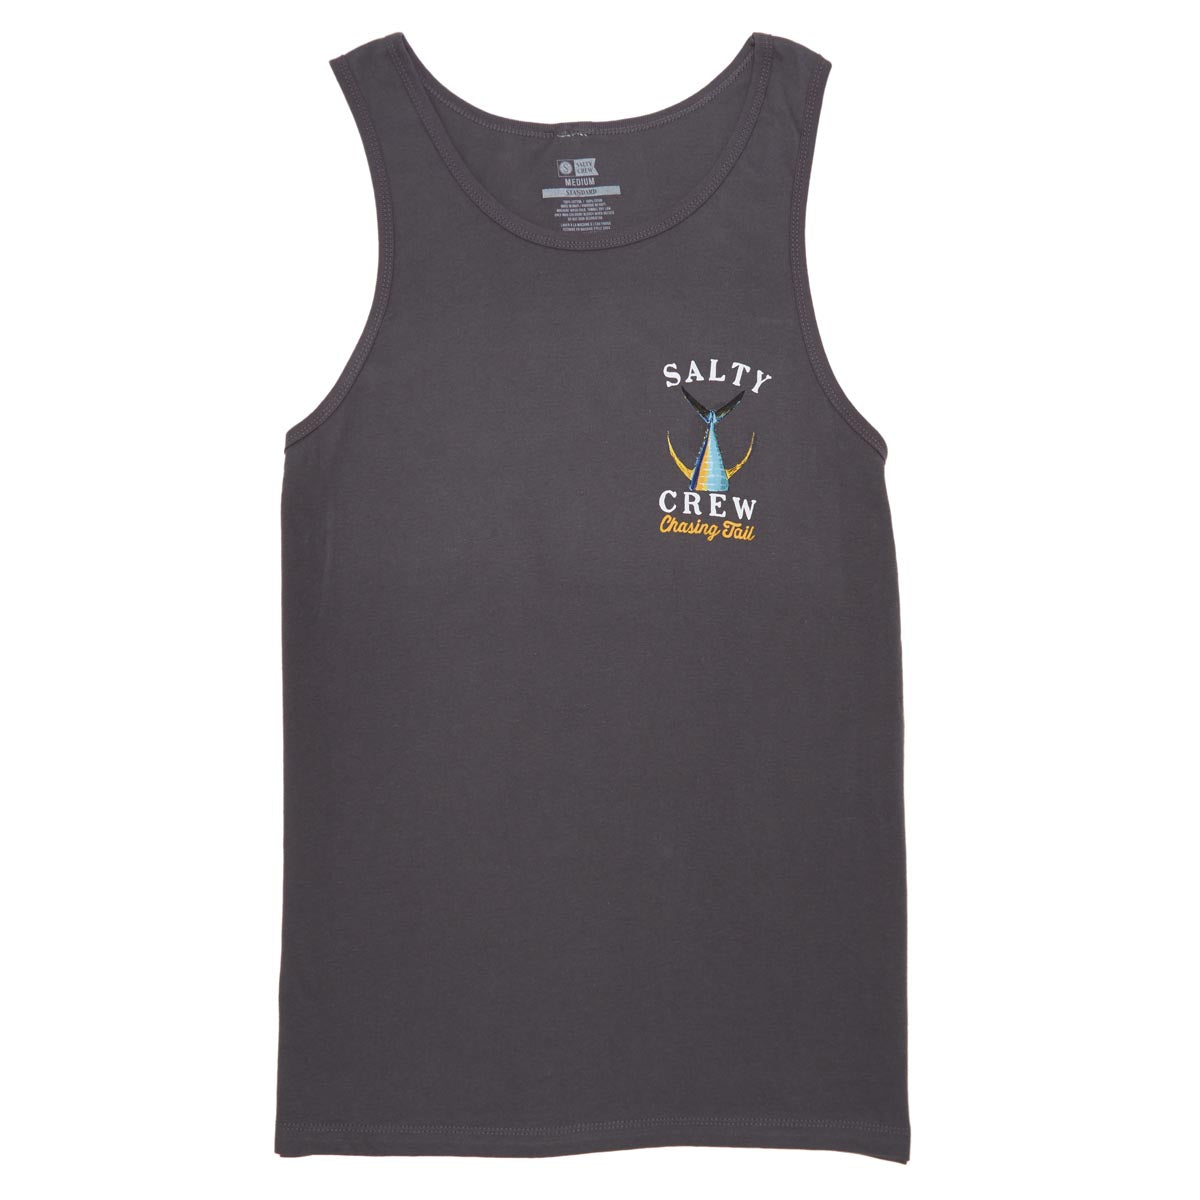 Salty Crew Tailed Tank Top - Charcoal image 2